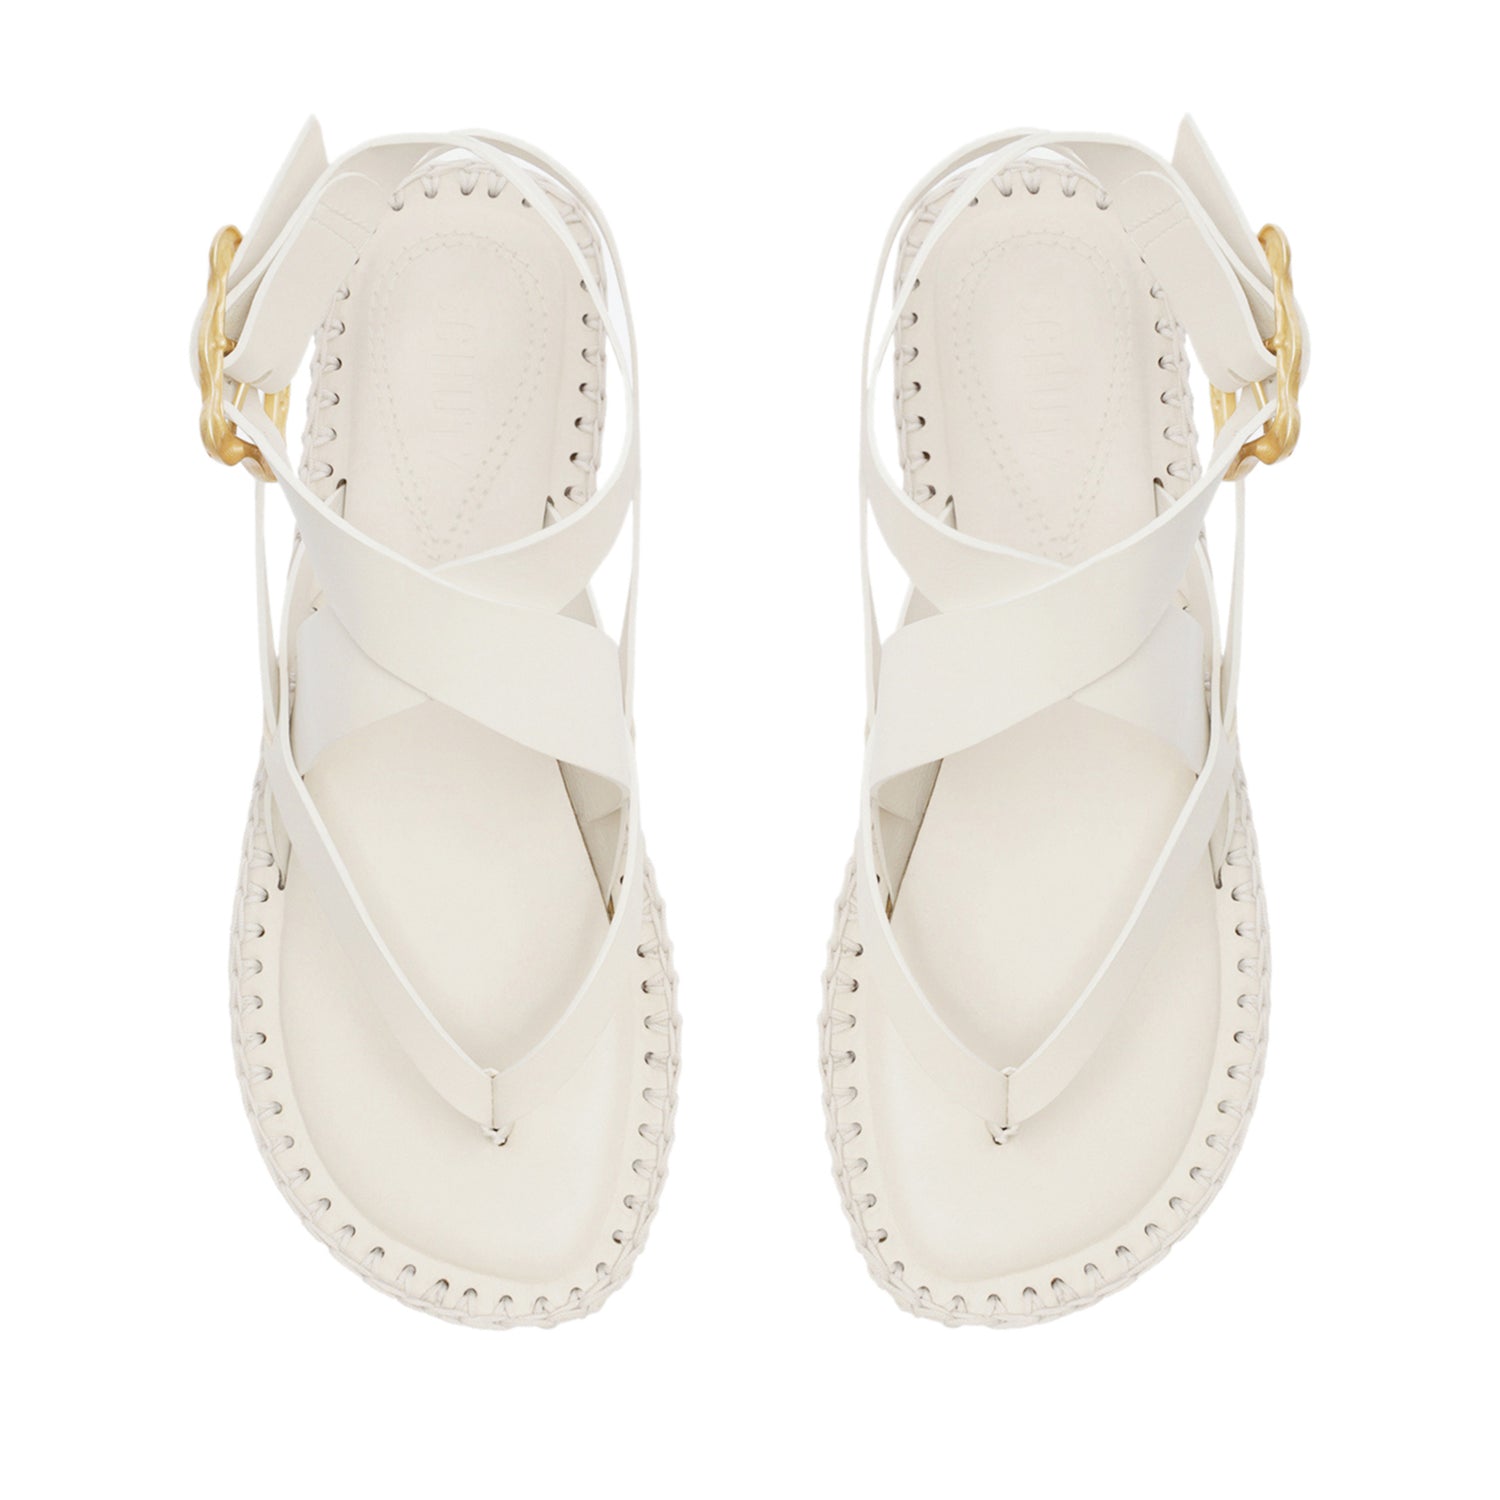 Keith Flat Leather Sandal Sandals Spring 24    - Schutz Shoes